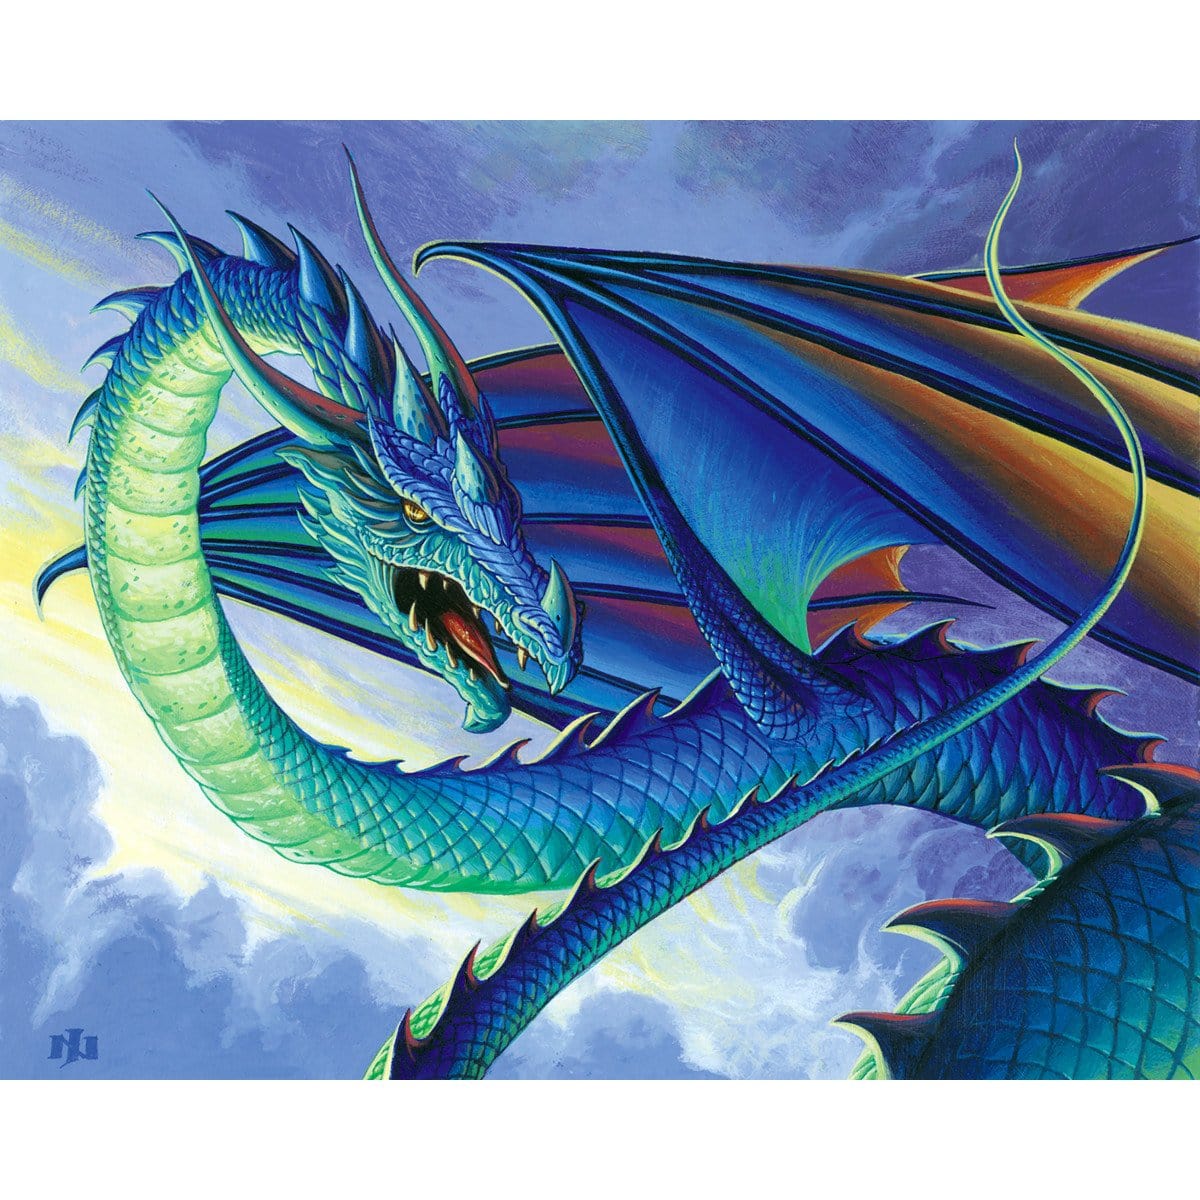 Iridescent Drake Print - Print - Original Magic Art - Accessories for Magic the Gathering and other card games